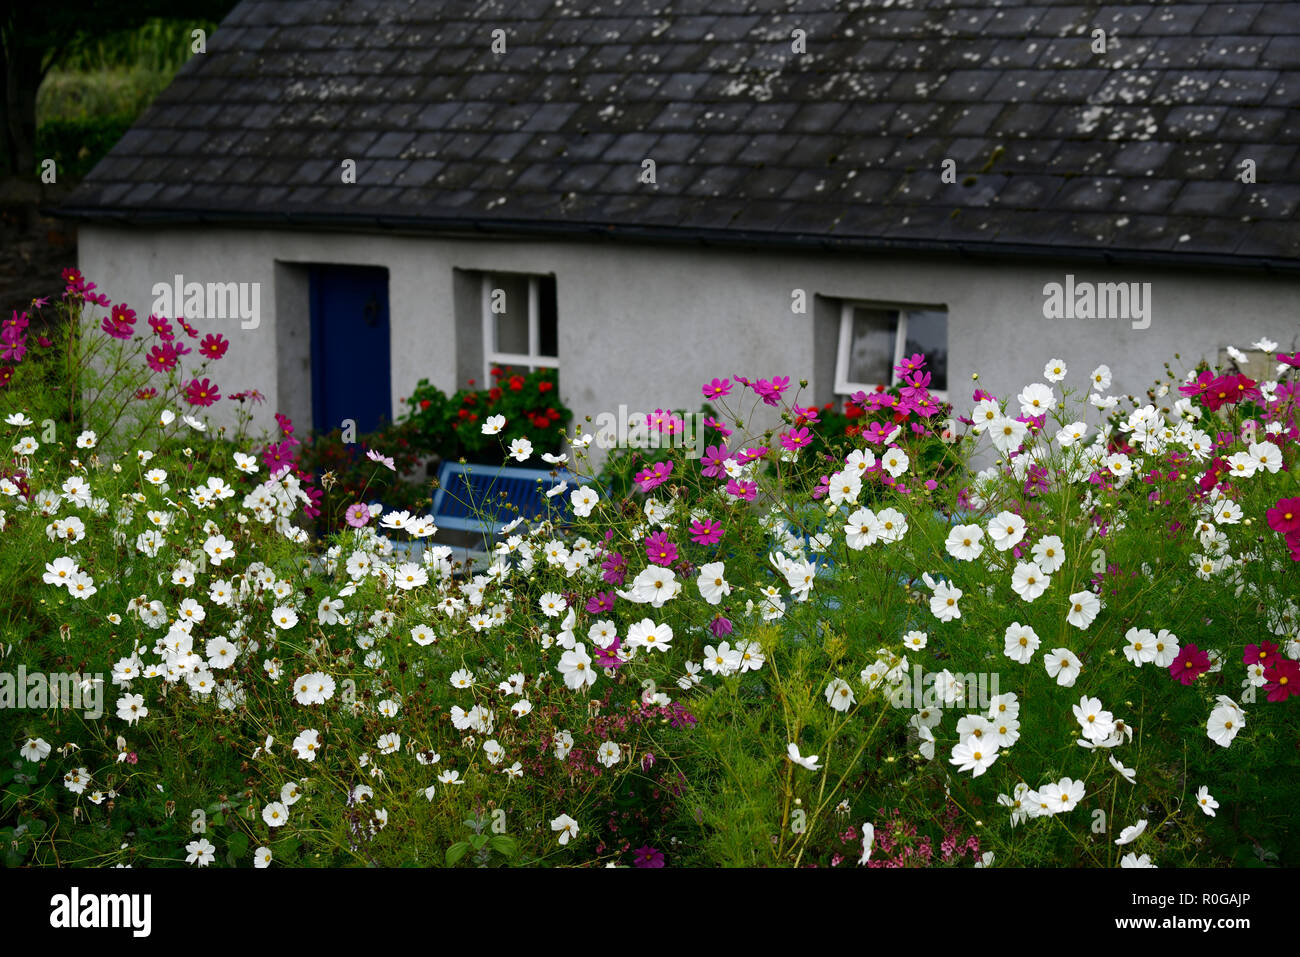 cosmos,flower,white,pink,flowers,display,display,bedding,plant,plants,cottage,RM Floral Stock Photo